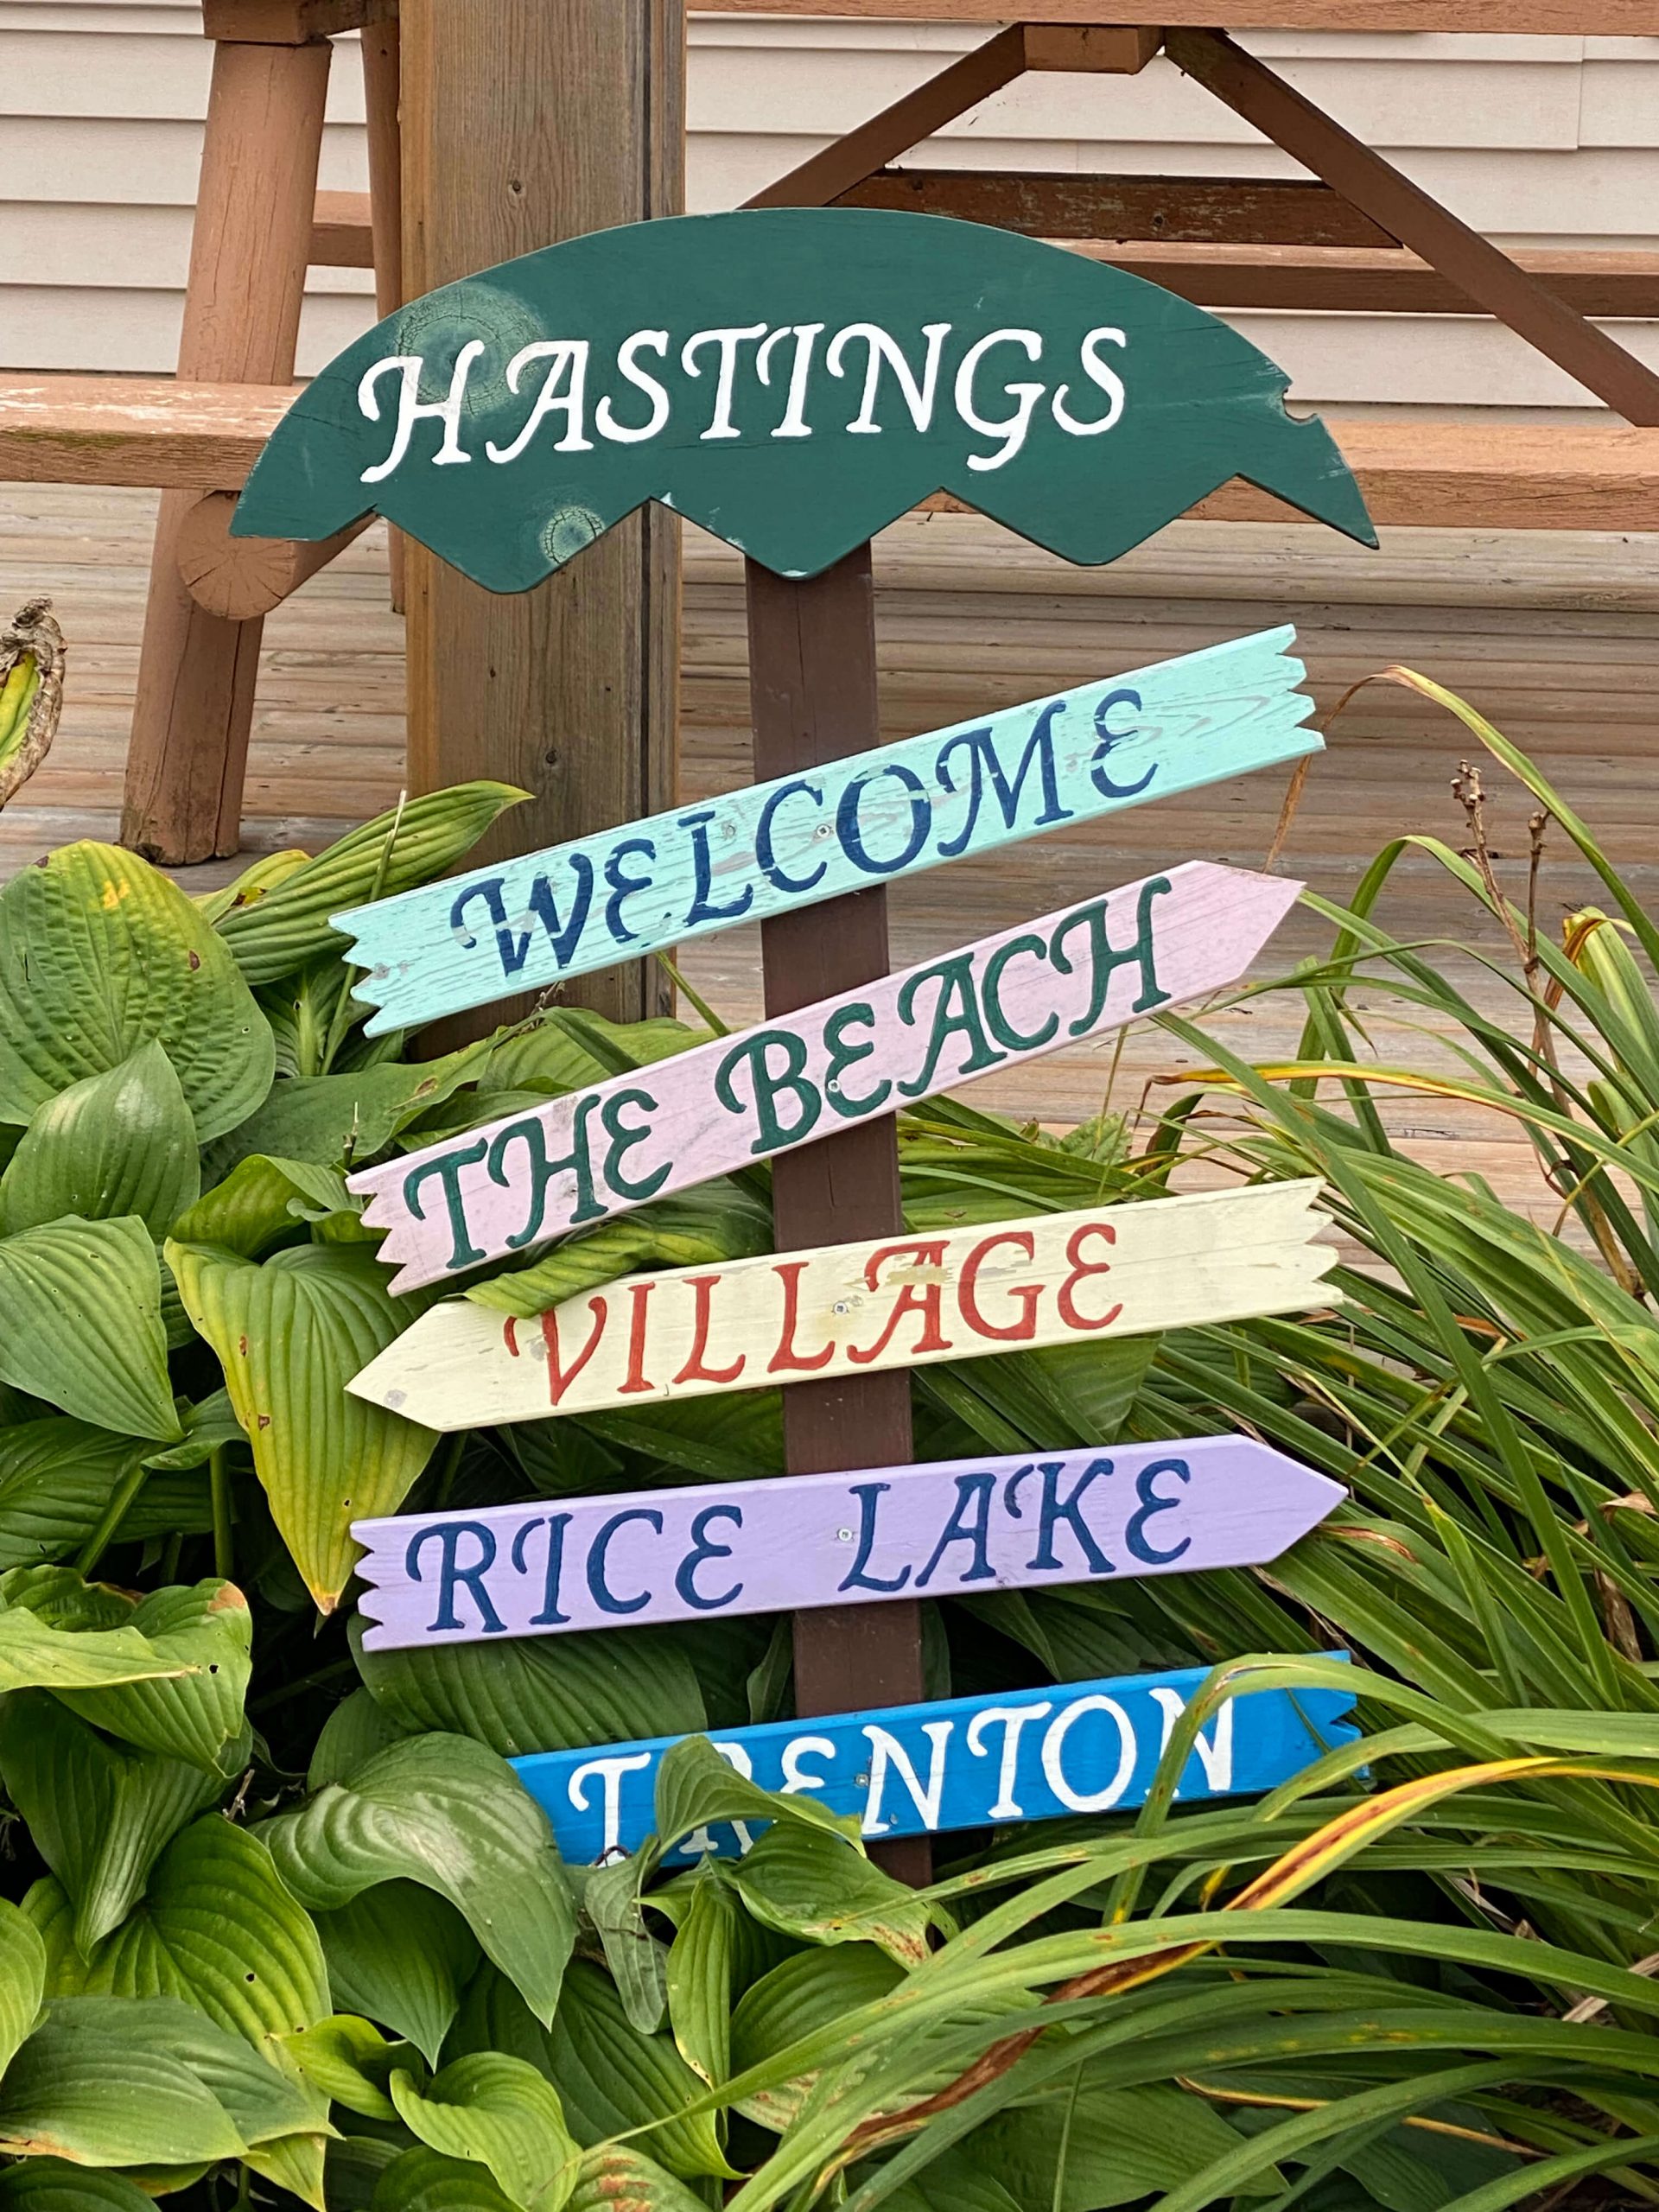 Hastings Marina Directional Sign directing and welcoming you to the beach, the village, rice Lake, Trenton